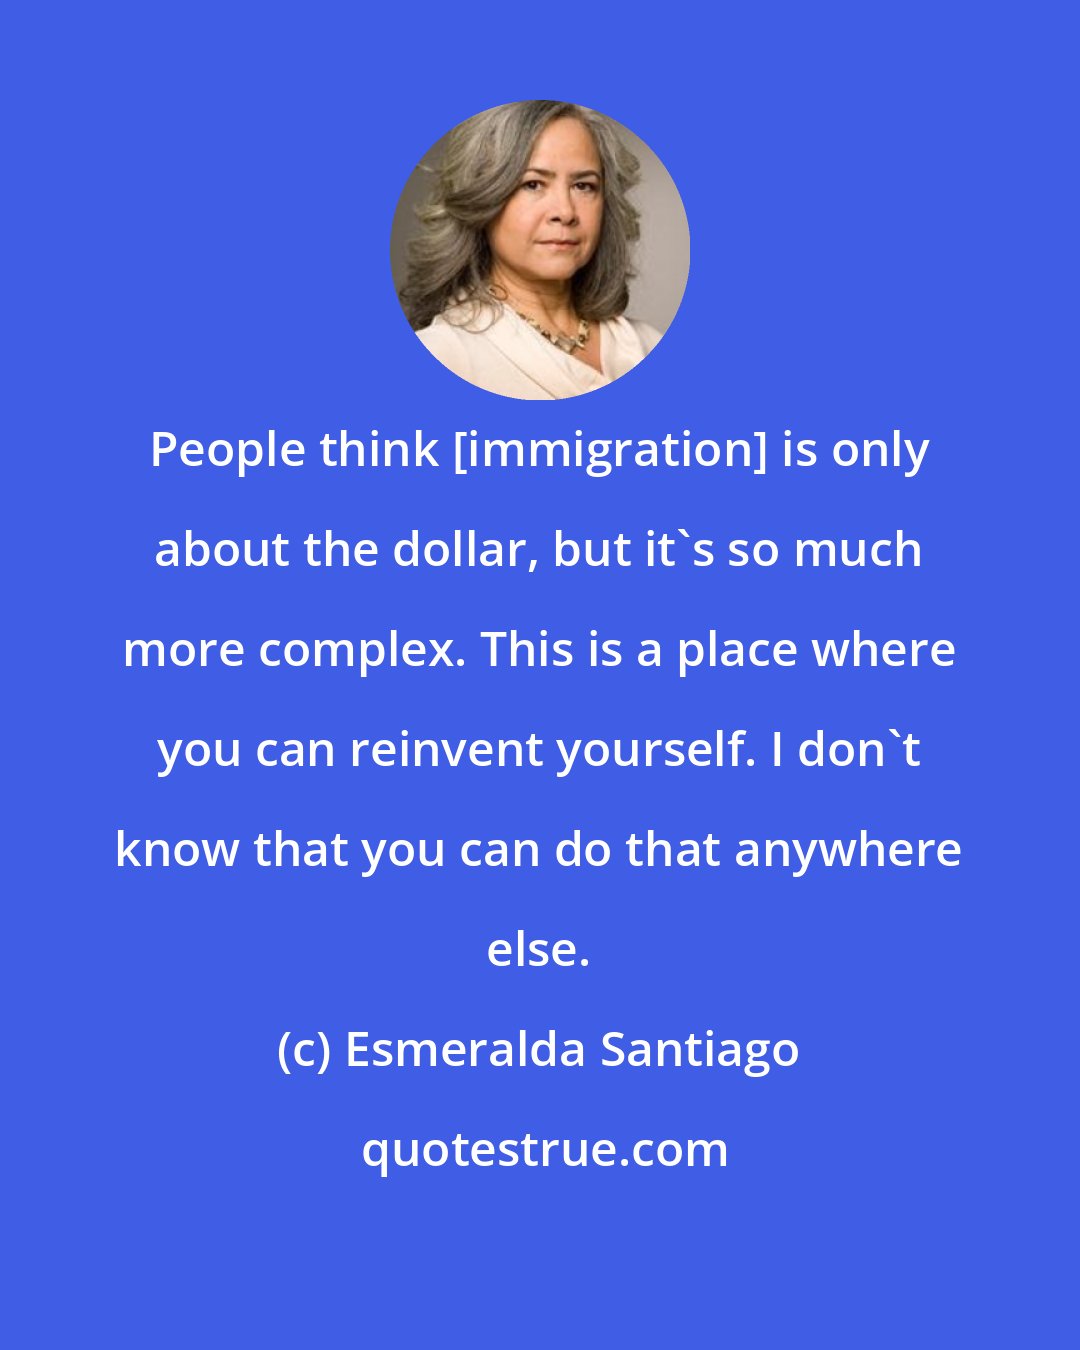 Esmeralda Santiago: People think [immigration] is only about the dollar, but it's so much more complex. This is a place where you can reinvent yourself. I don't know that you can do that anywhere else.